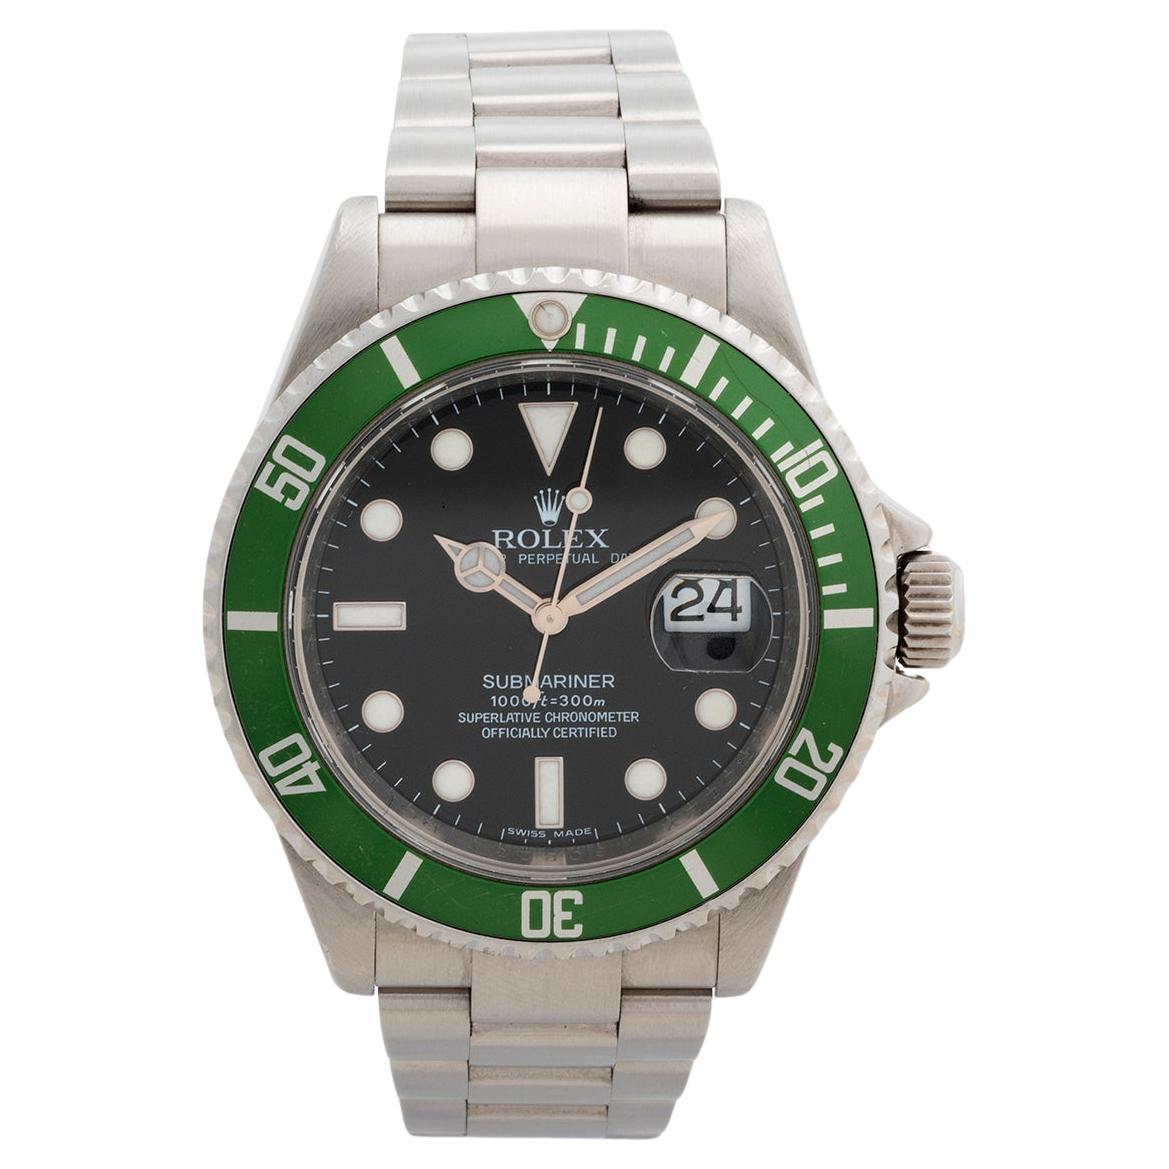 What is a Rolex 1680?